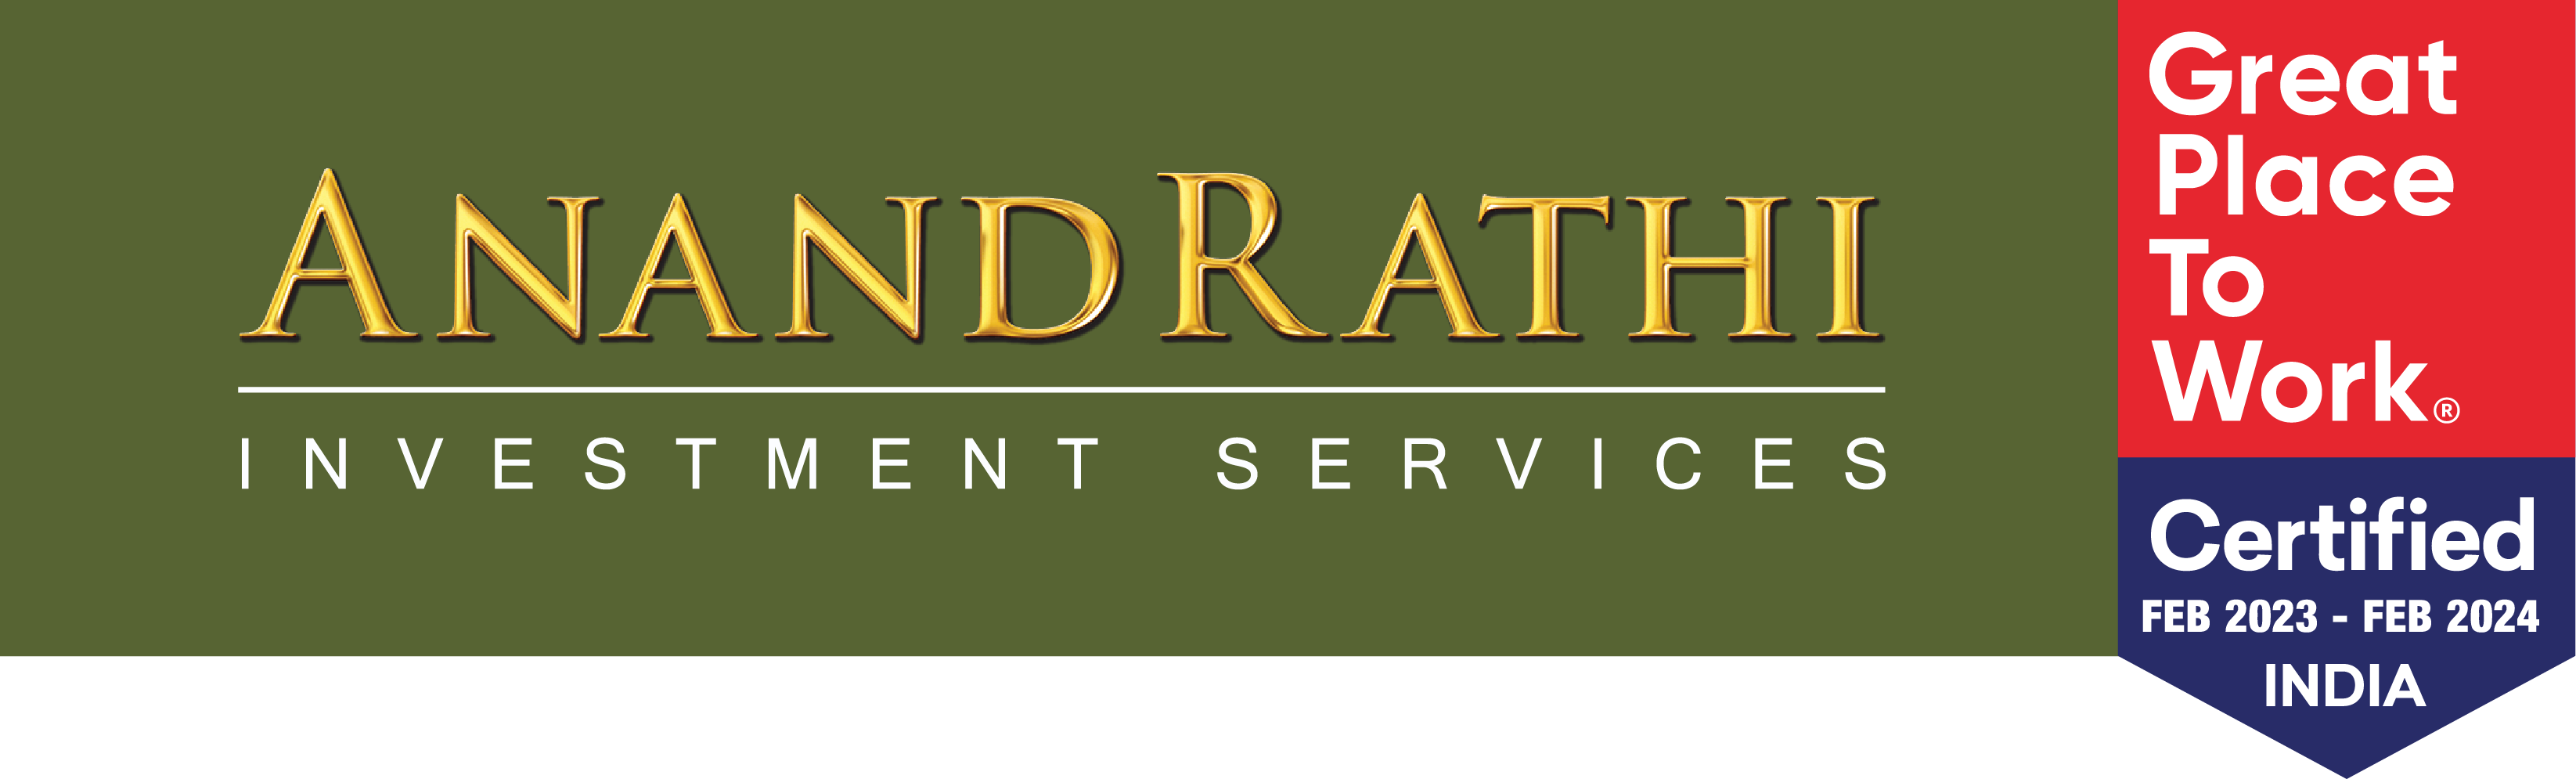 AnandRathi � Financial Services Firm